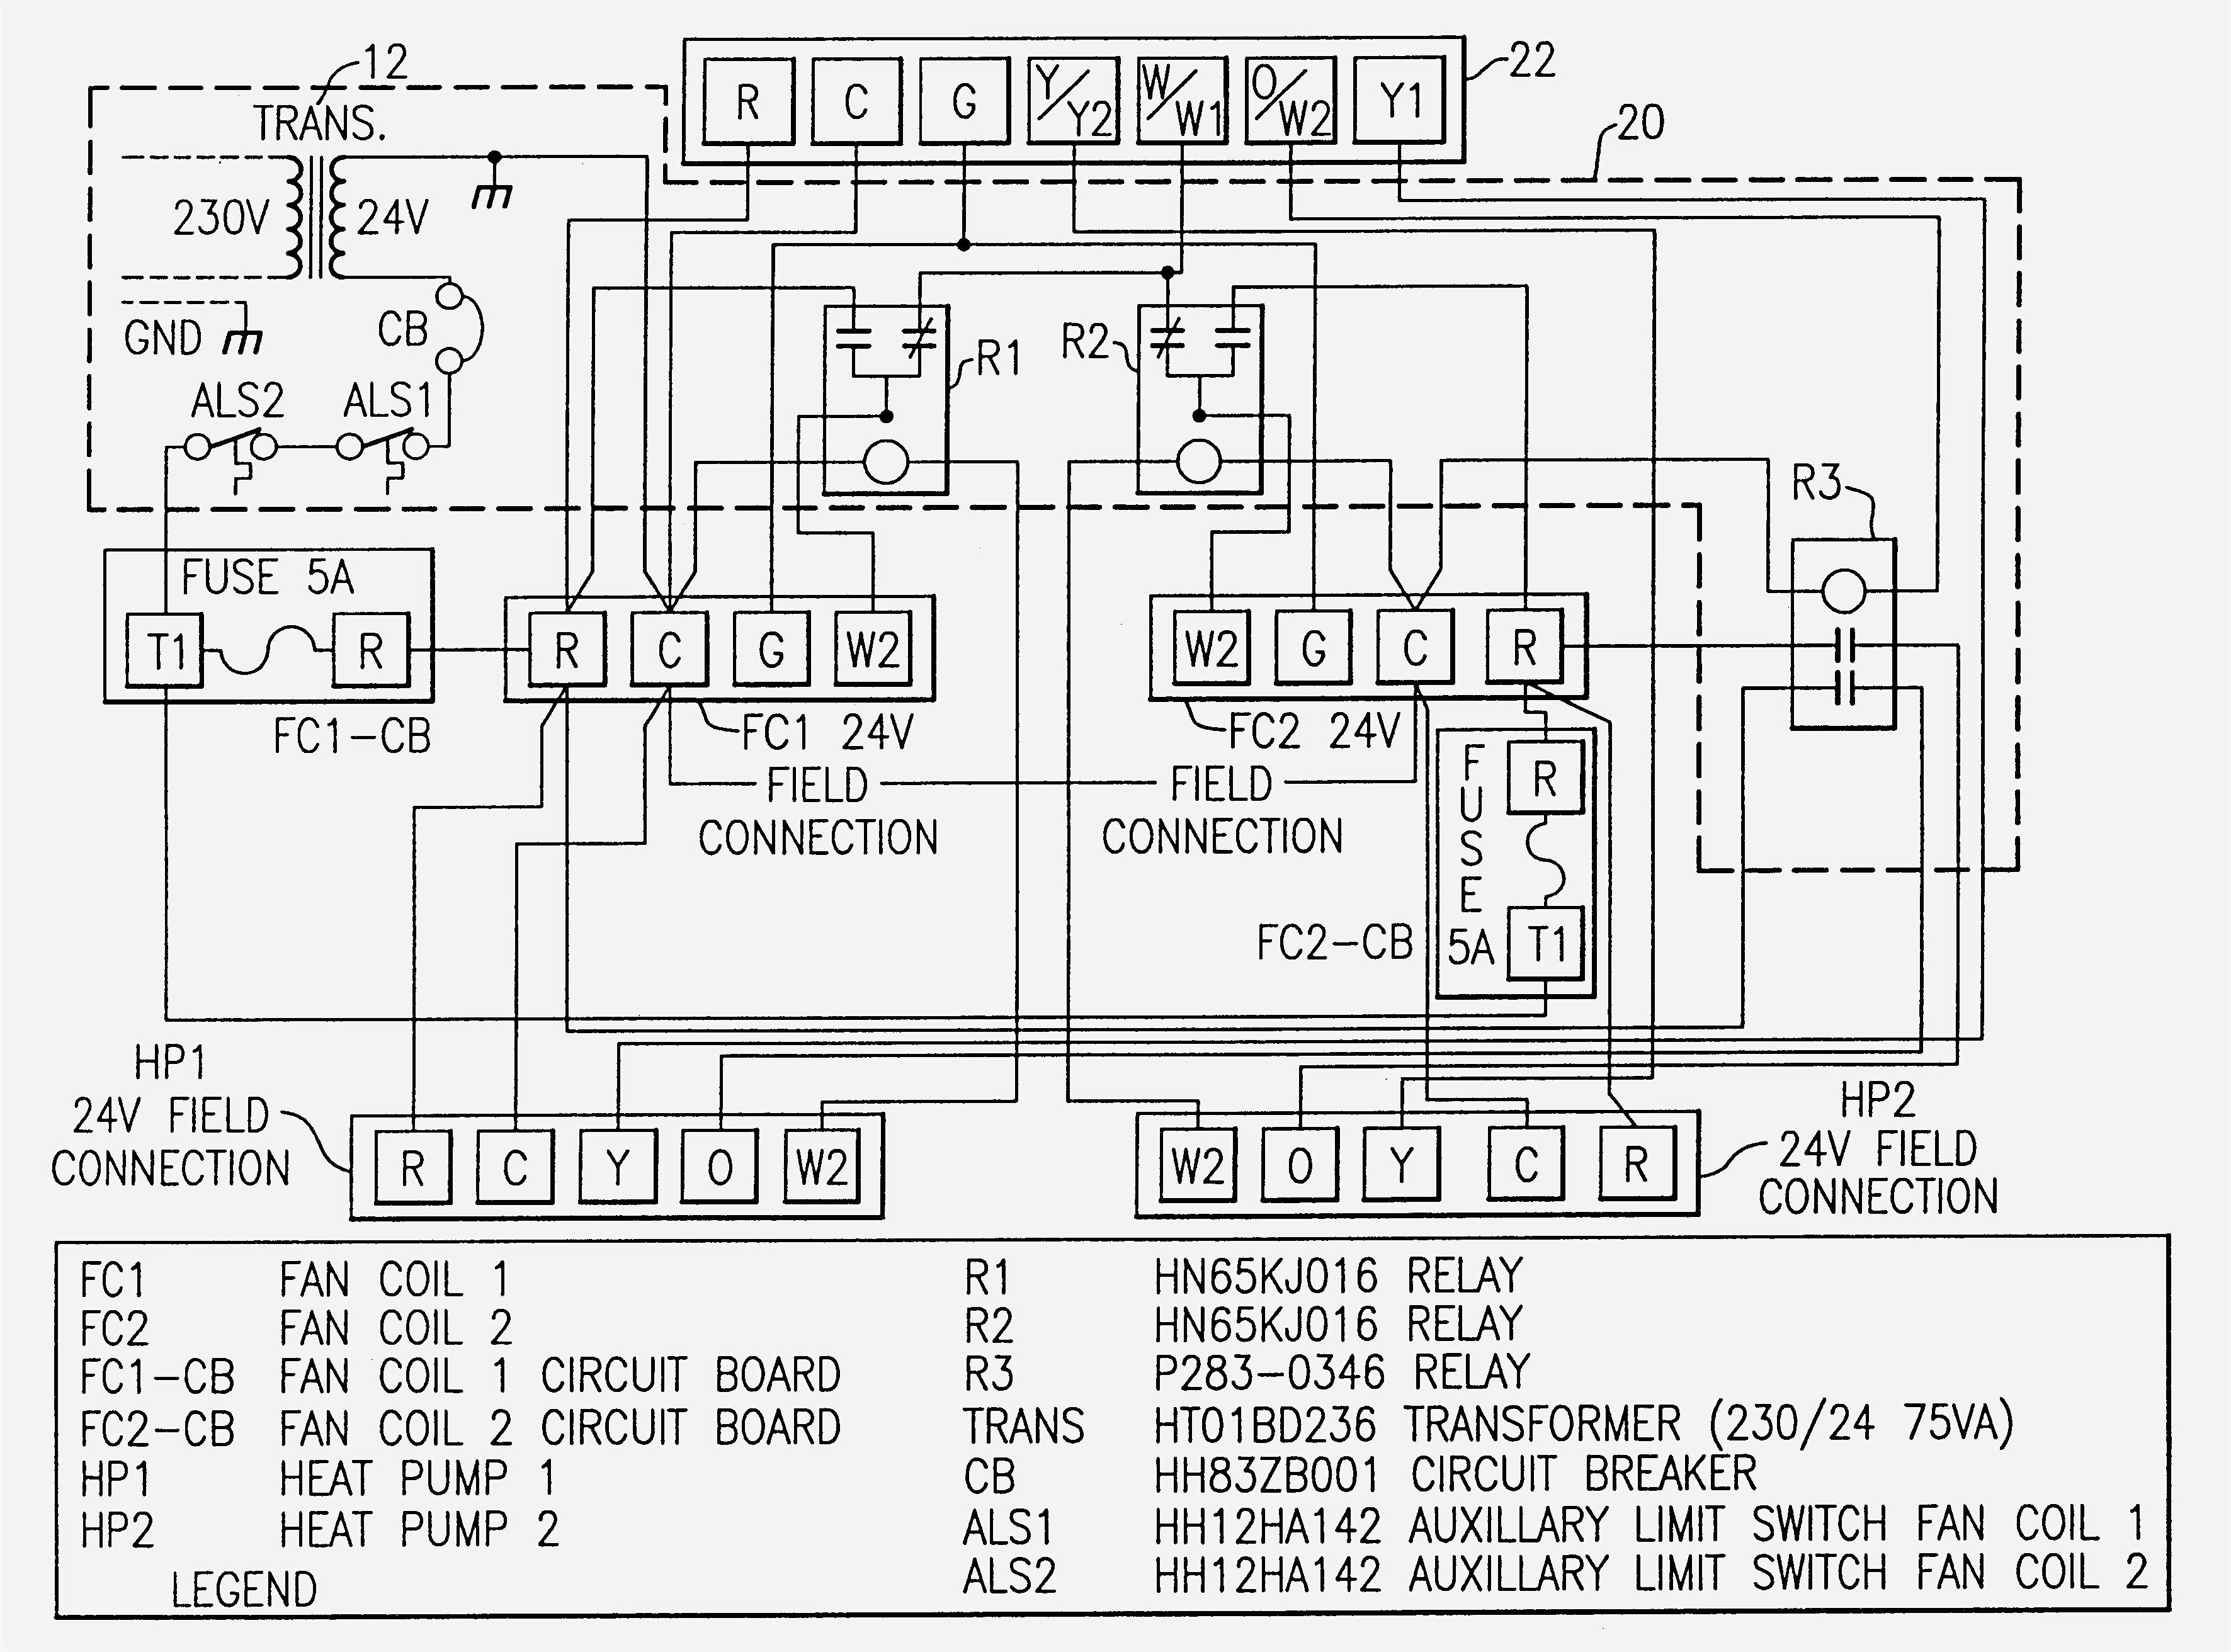 Payne Electric Furnace Sequencer Wiring Diagram | Wiring Diagram - Electric Furnace Sequencer Wiring Diagram